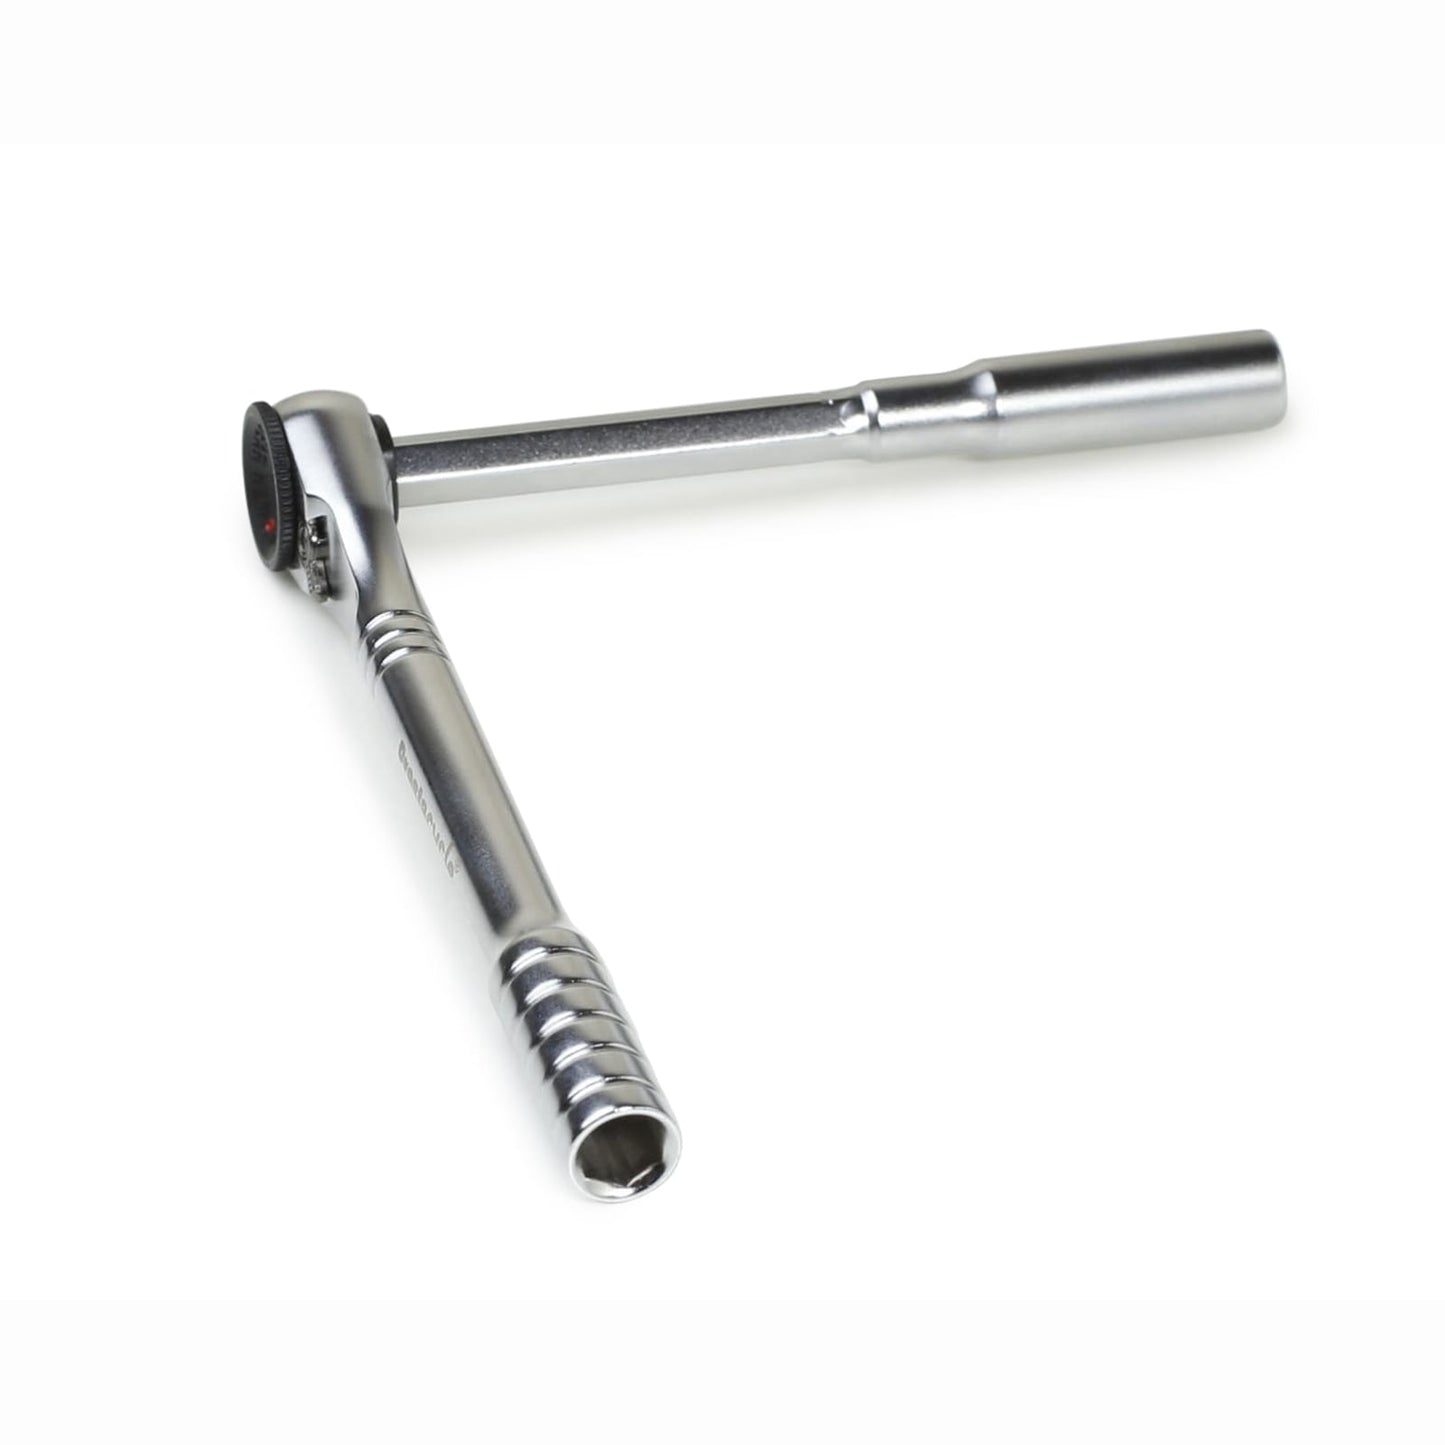 Prestacycle T-Handle Ratchet - 3 way Ratchet and T-Handle Tool set (Ratchet and Extension only)